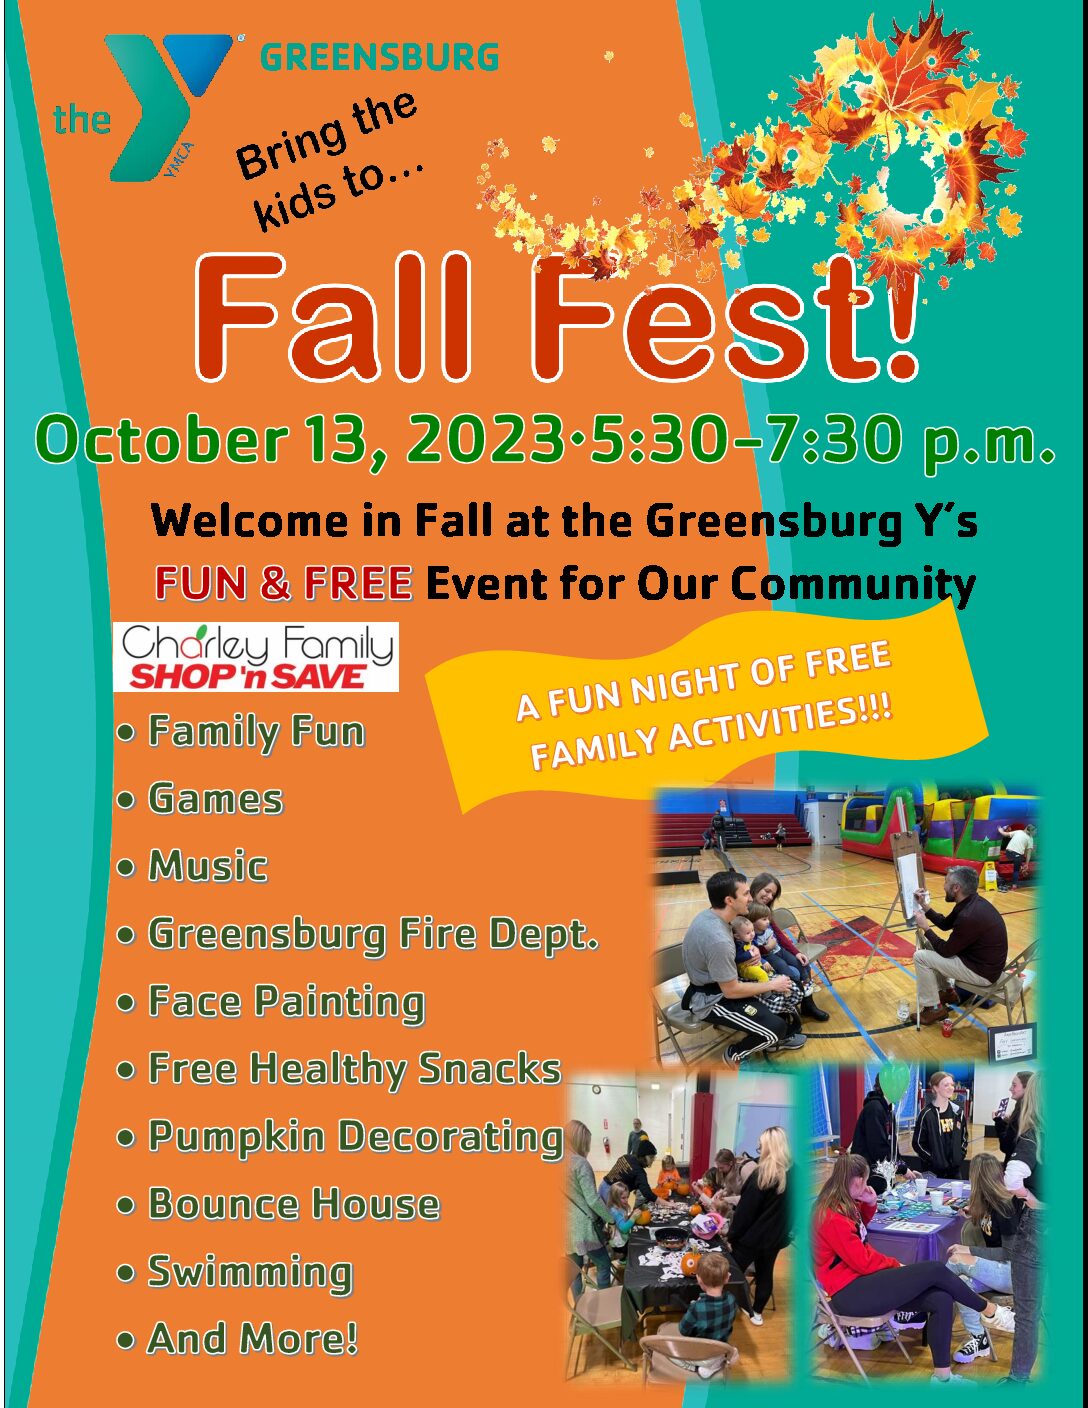 FALL FEST 2023-October 13 from 5:30-7:30 p.m.